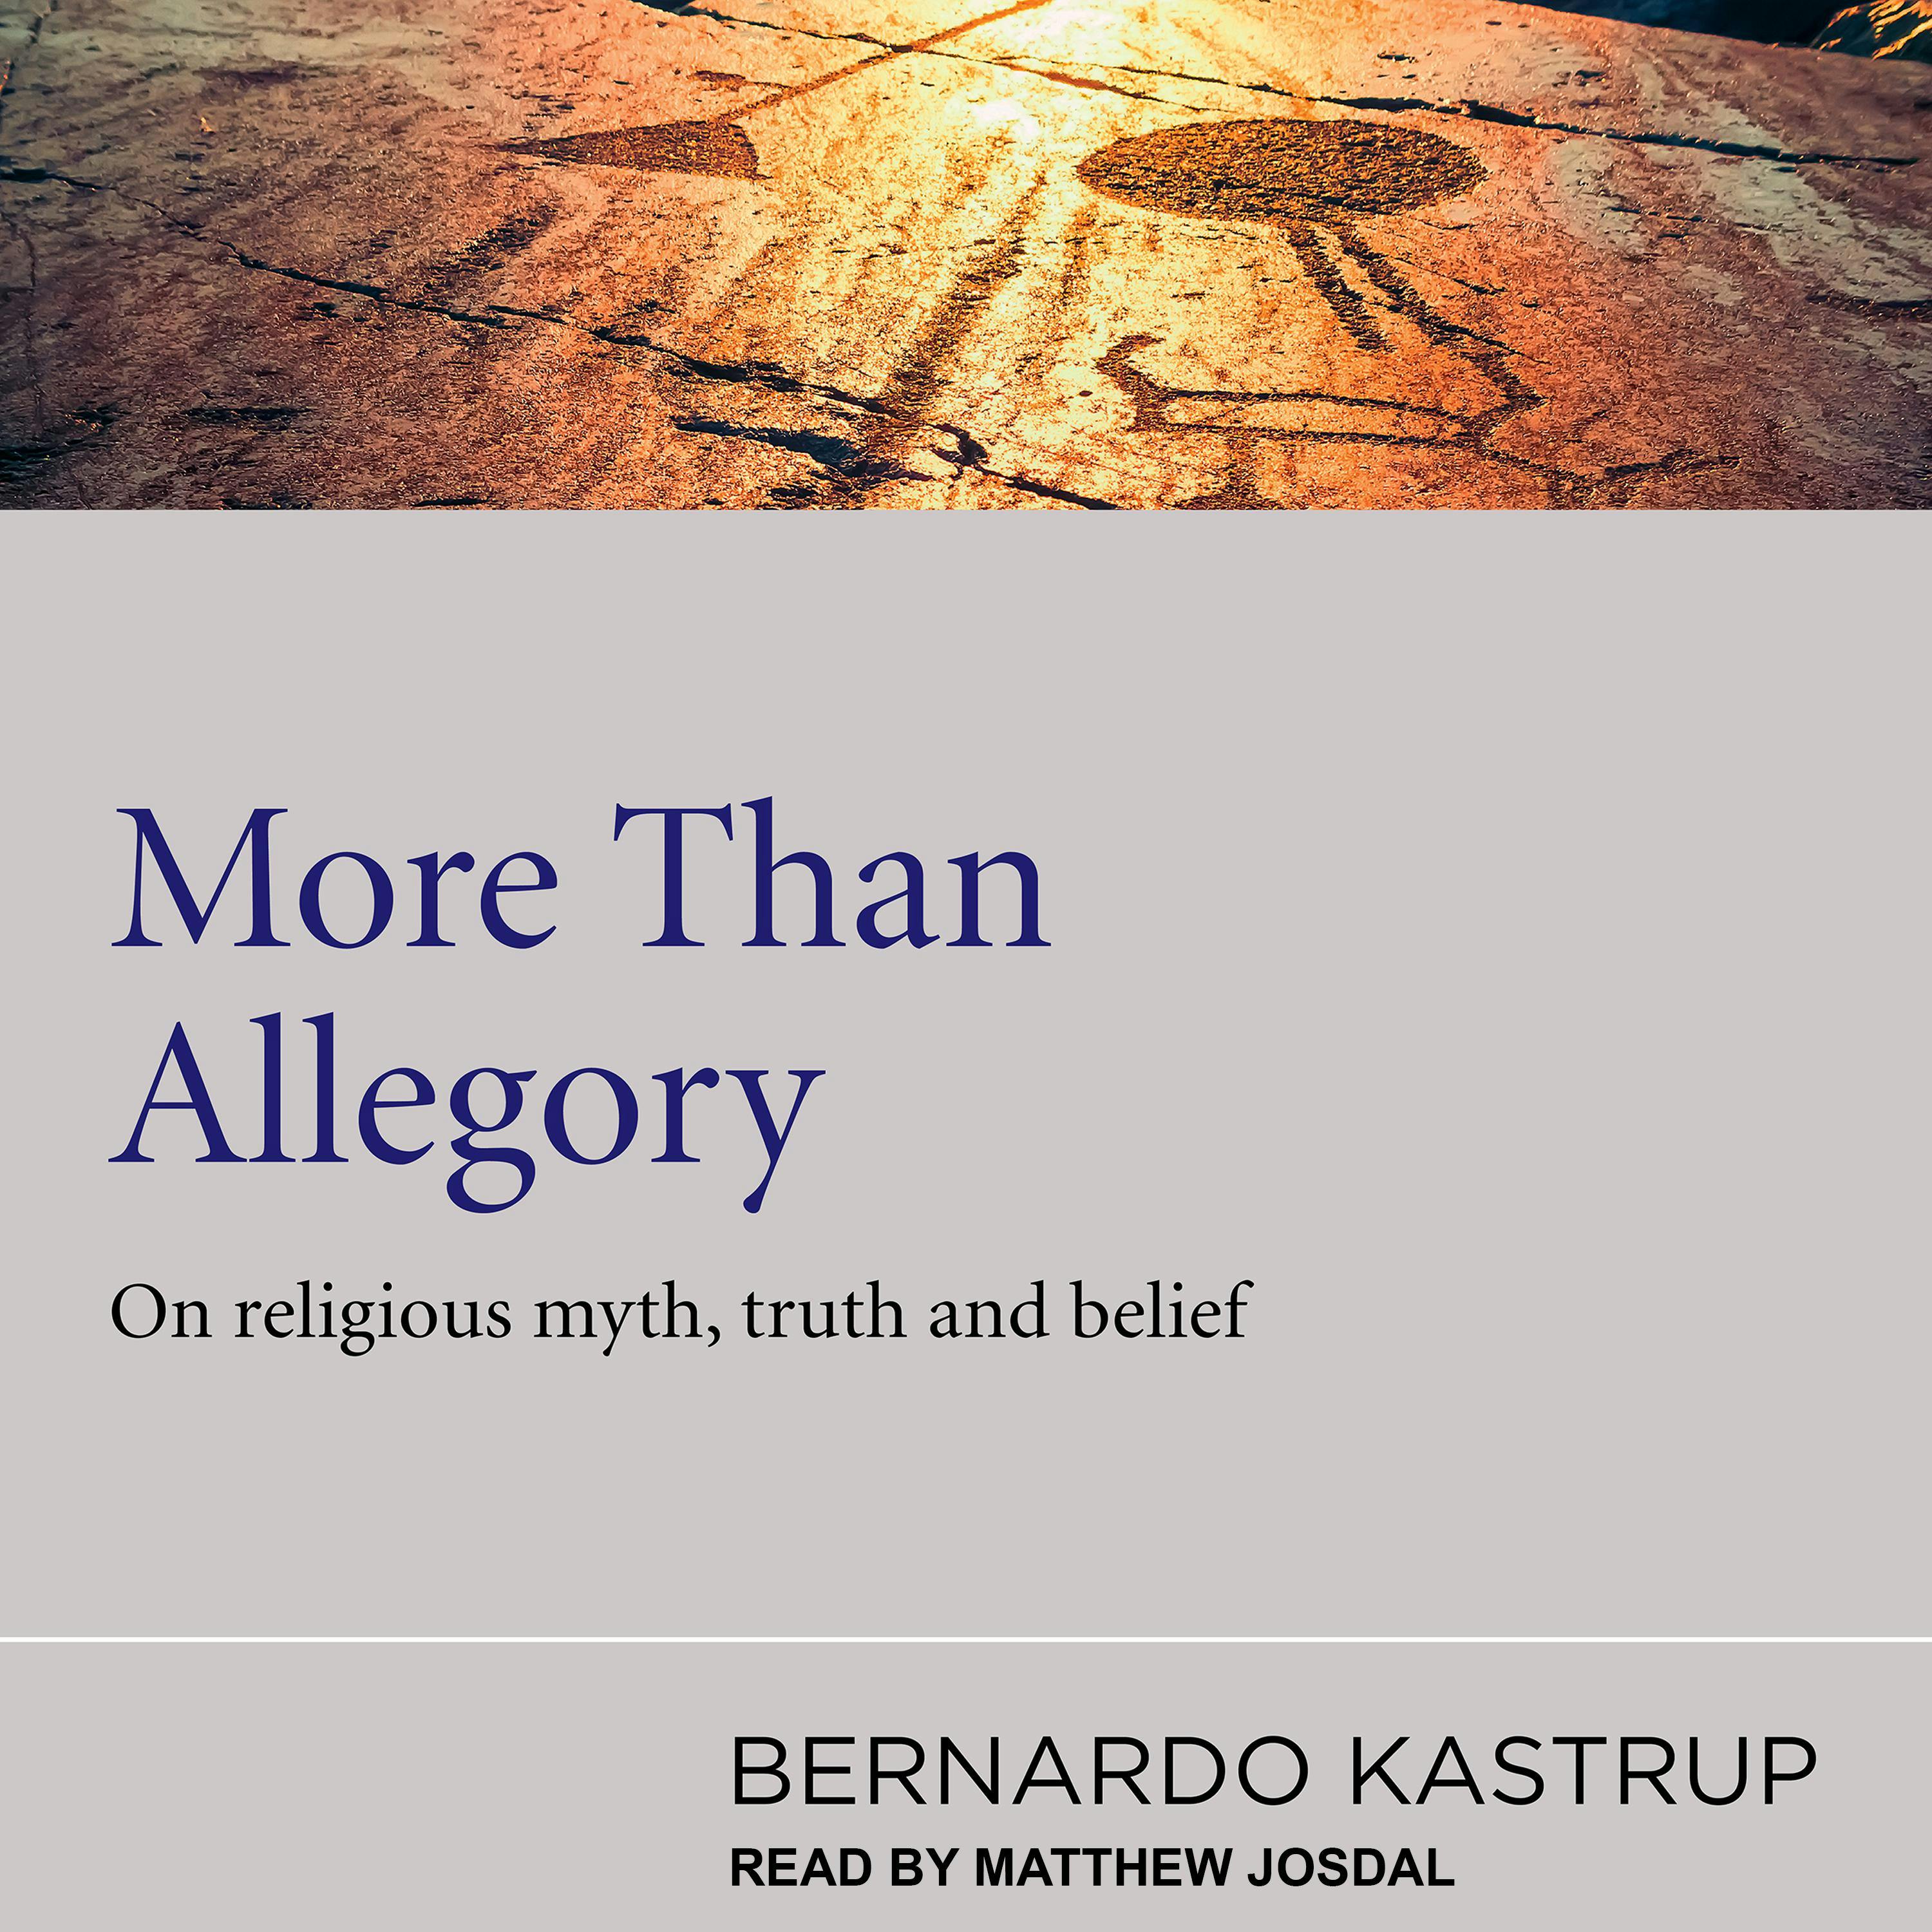 More Than Allegory: On Religious Myth, Truth And Belief - Bernardo Kastrup